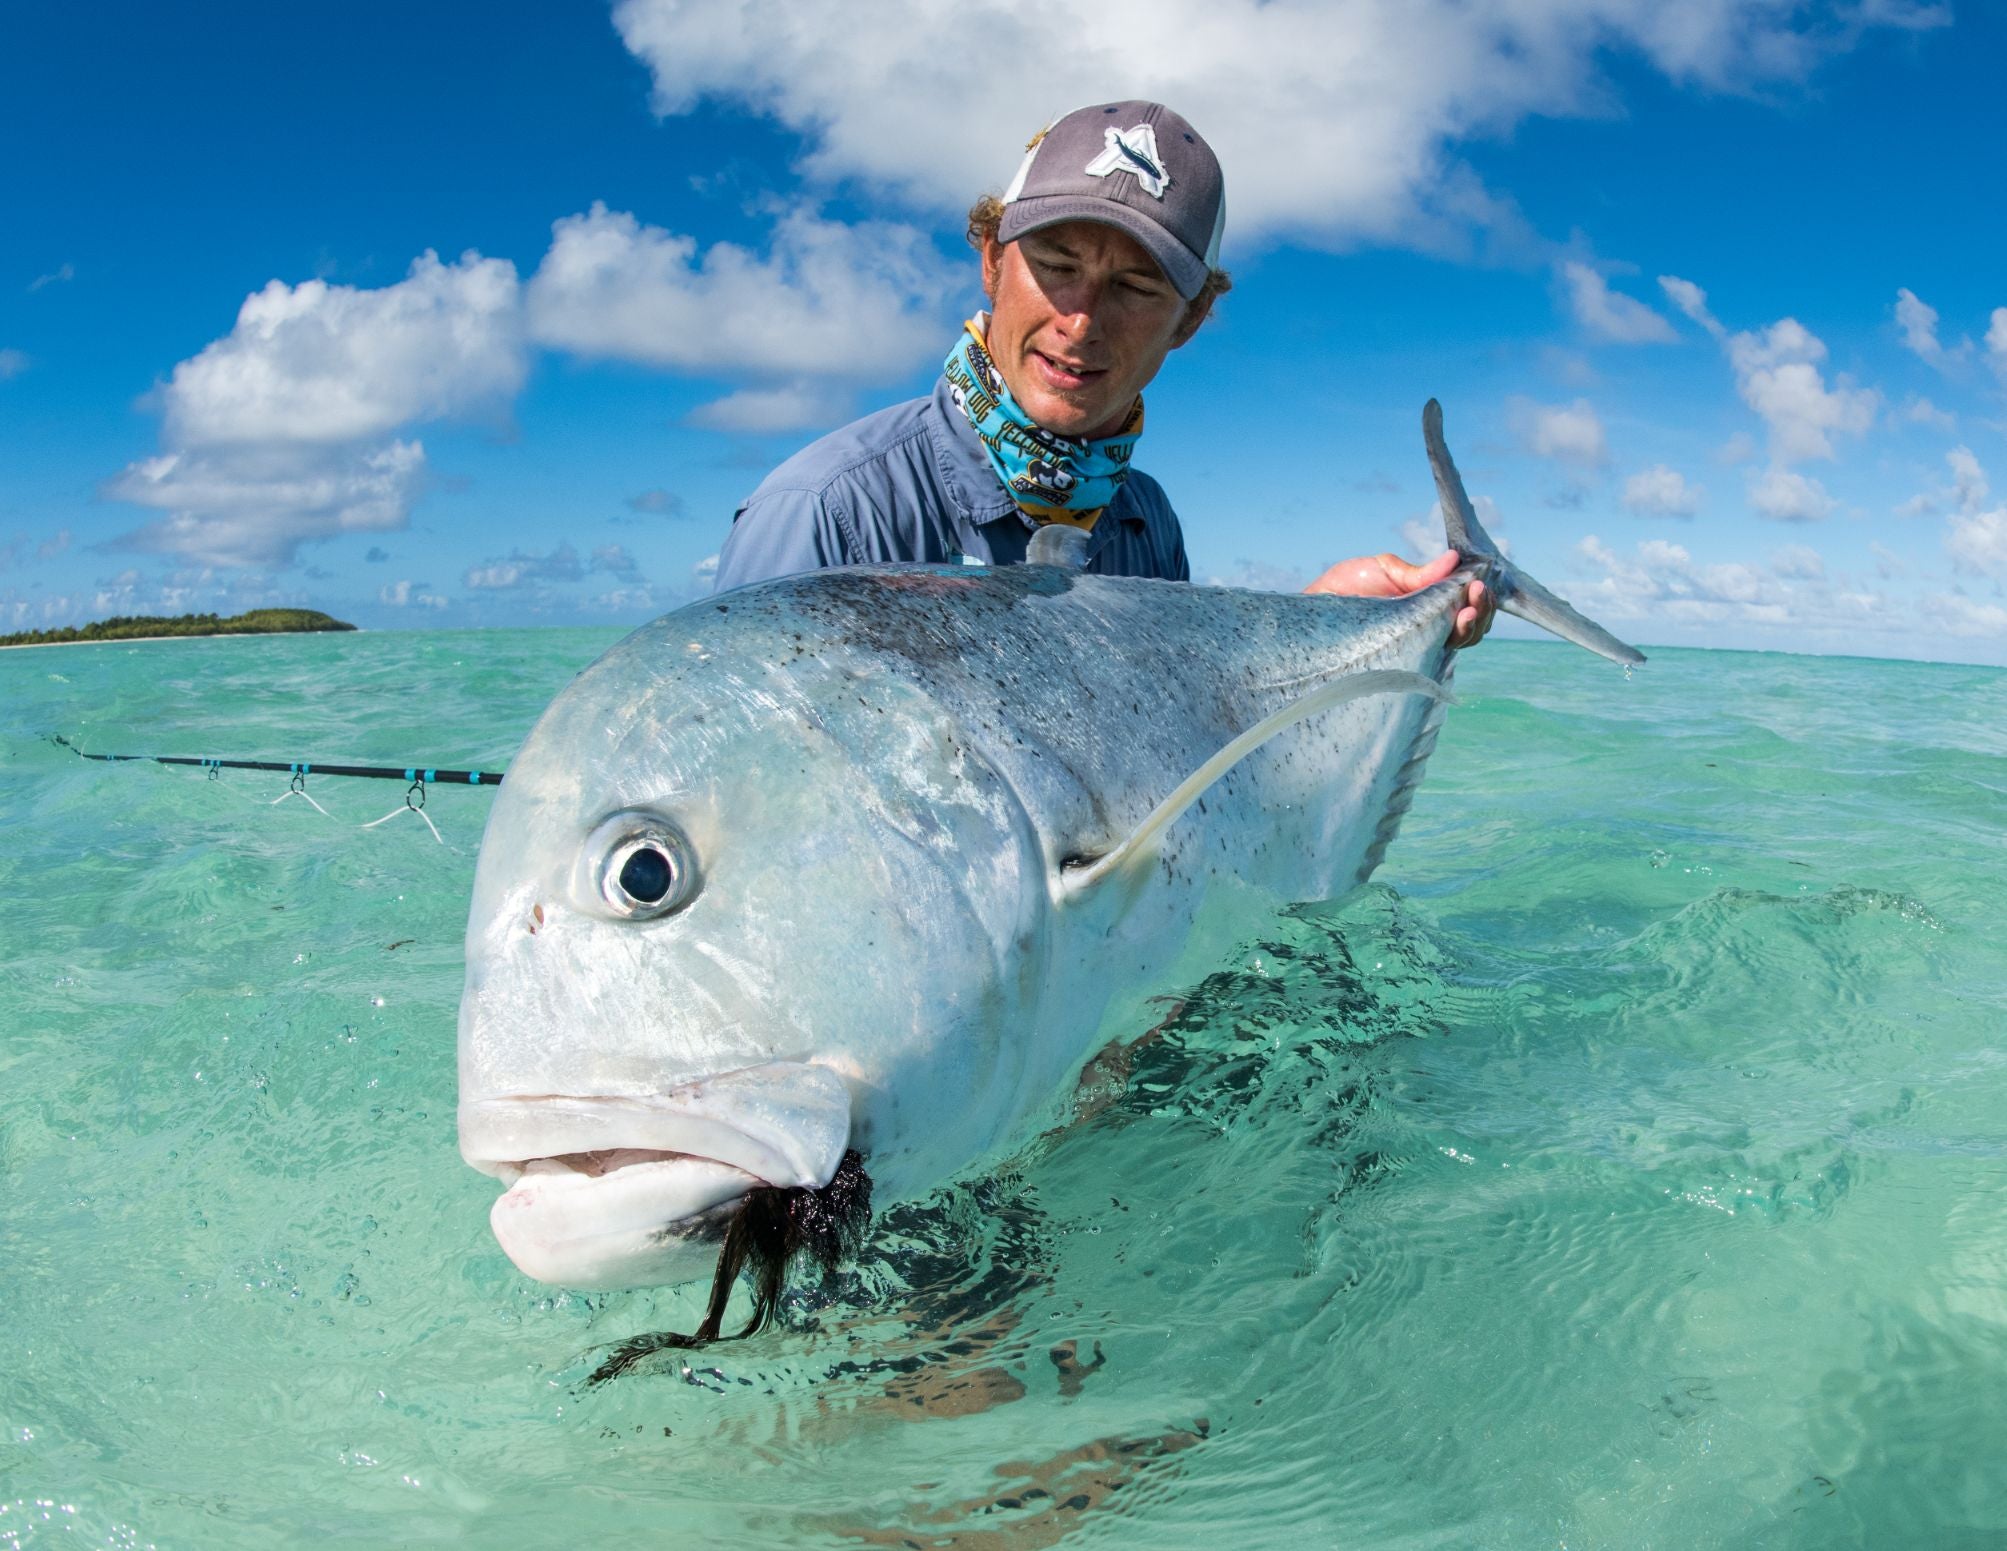 Buy fishing accessory Online in Seychelles at Low Prices at desertcart